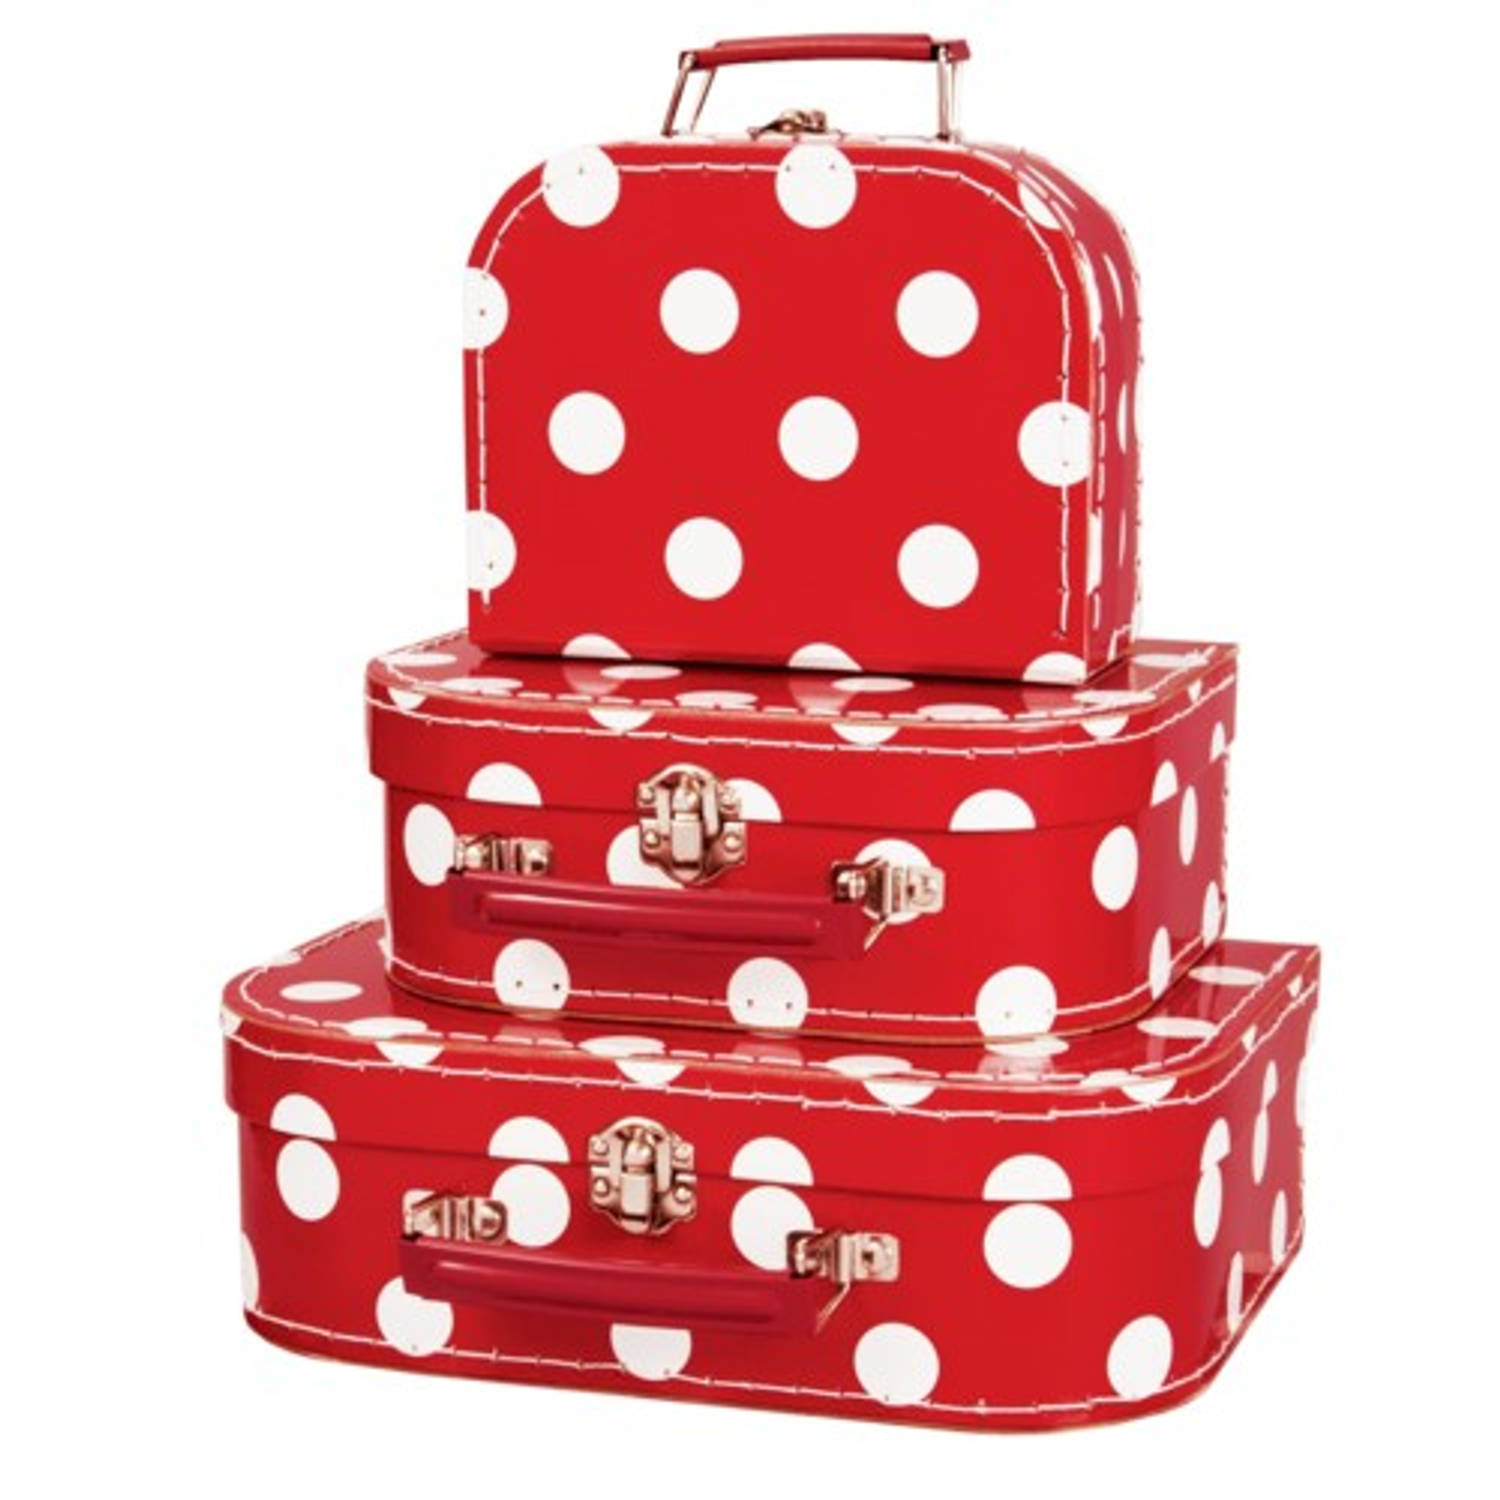 Simply for Kids 3-Delige Kofferset Polkadot Rood